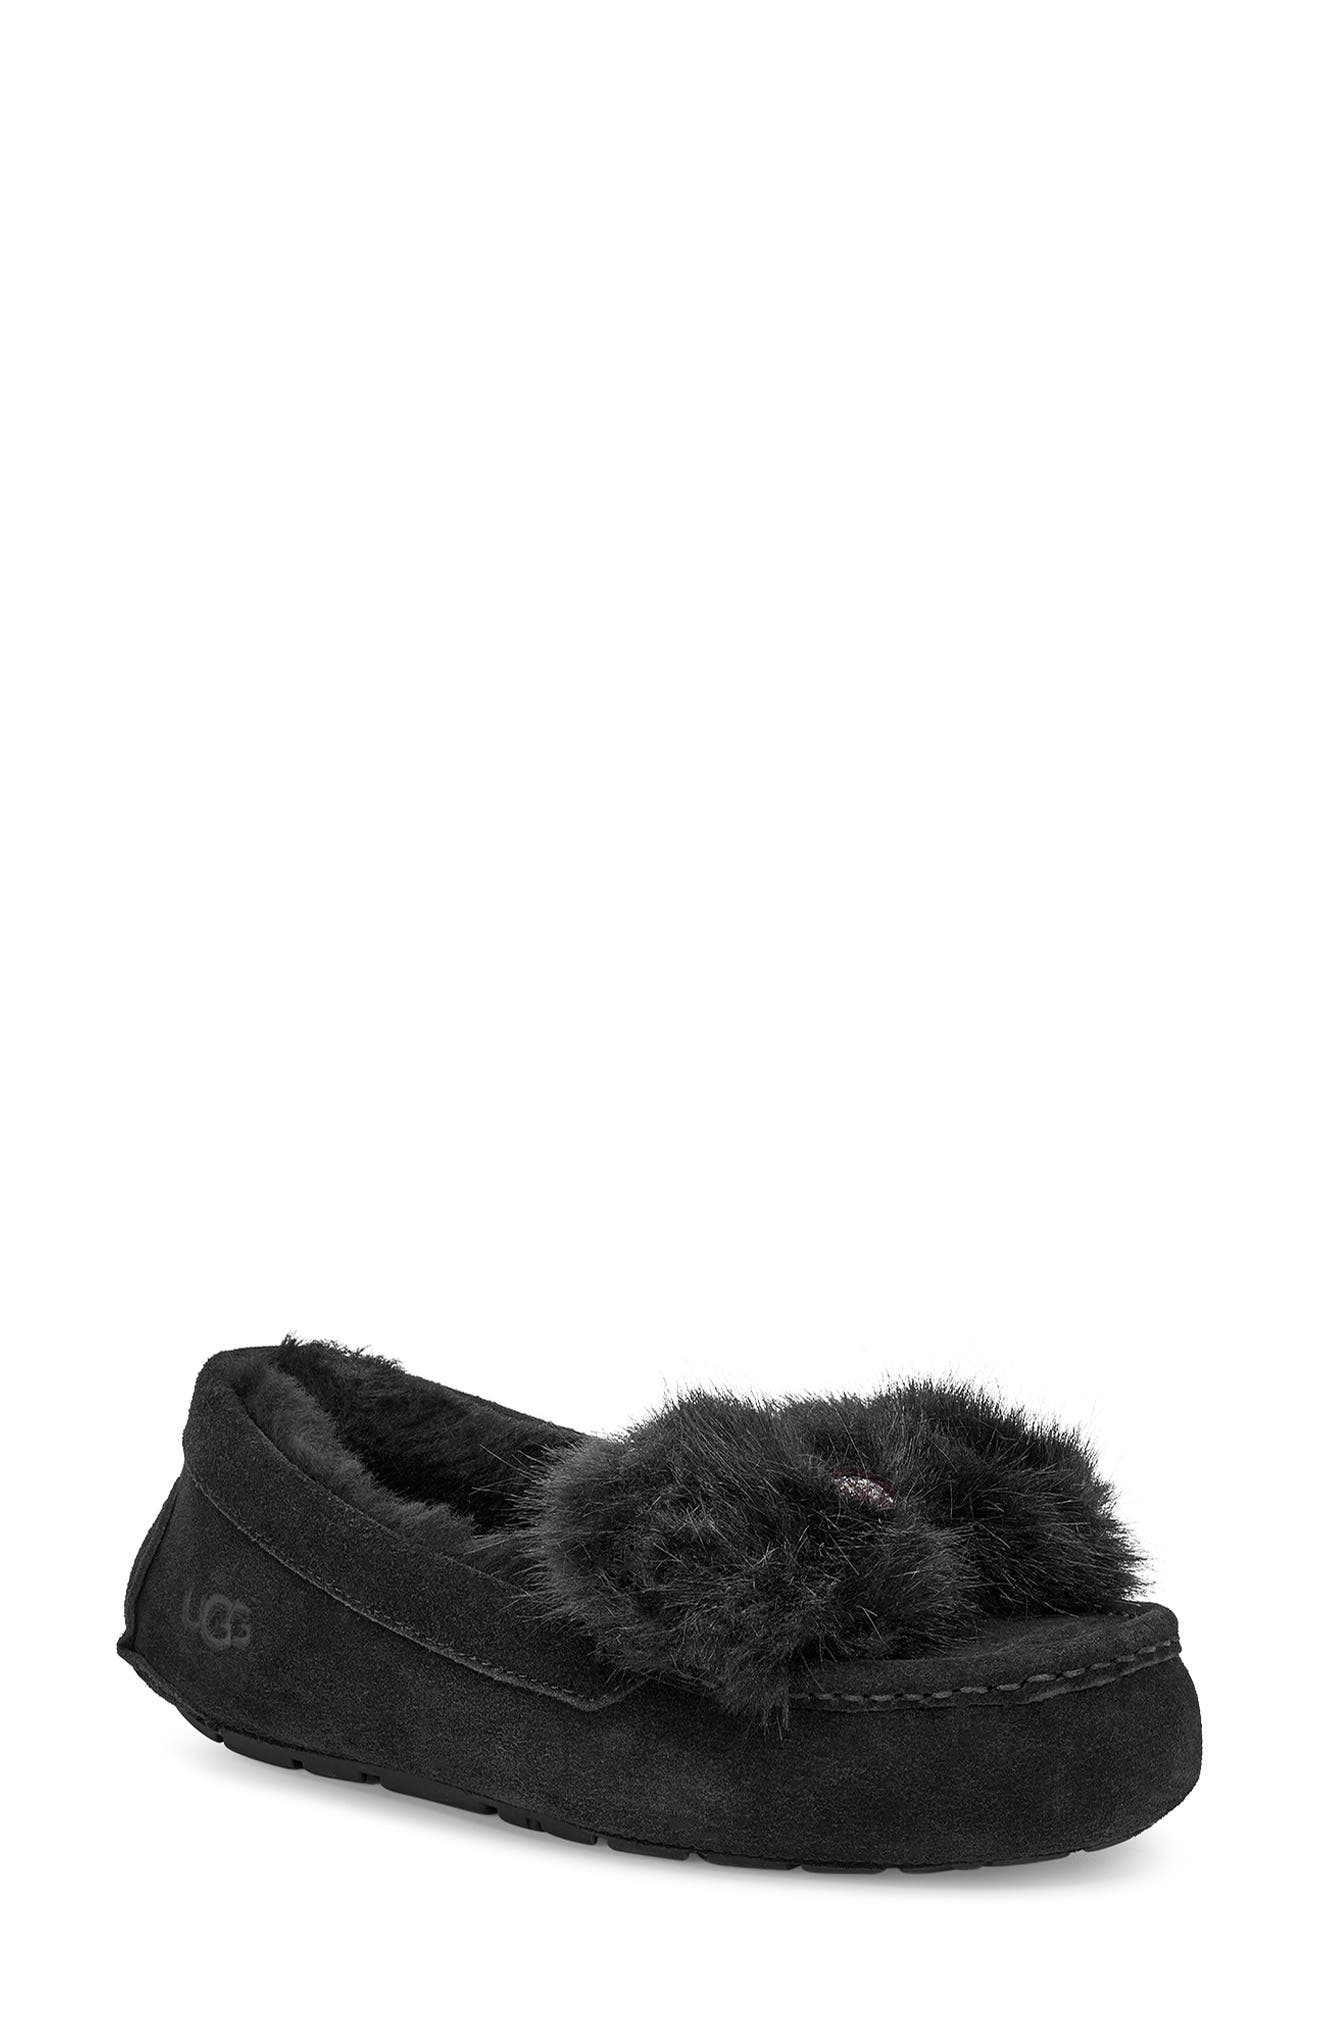 ugg ansley bow slippers